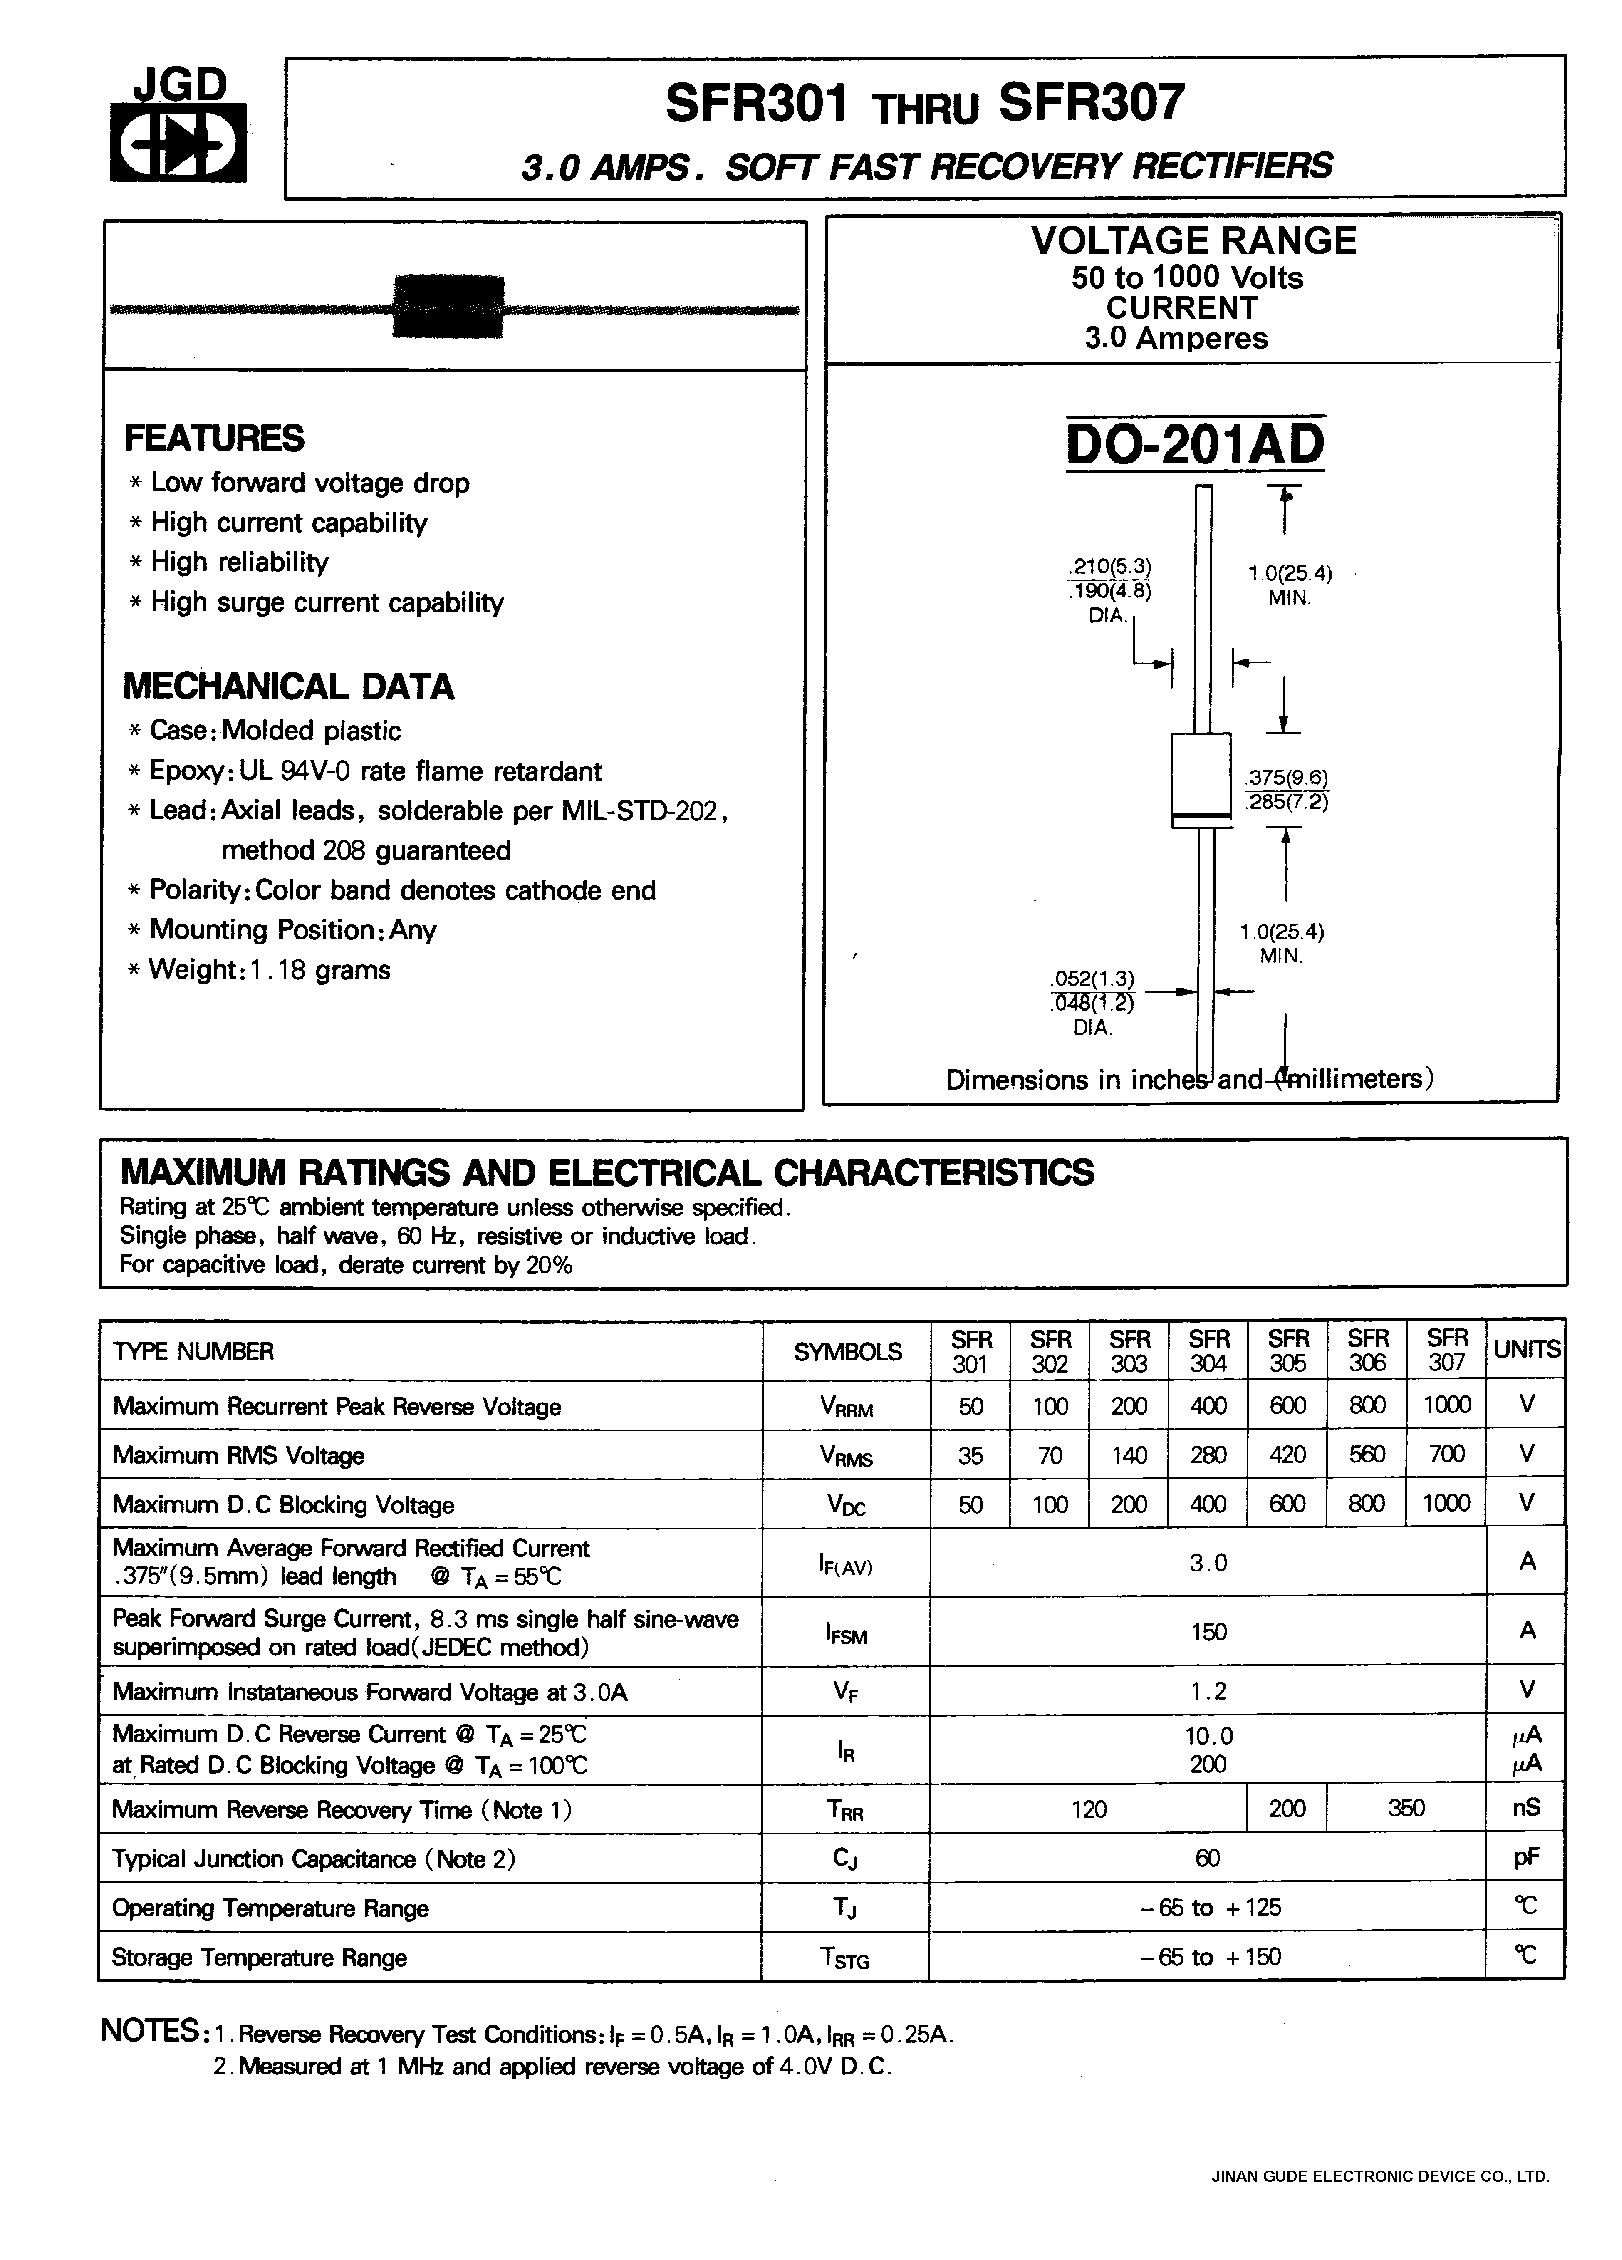 Datasheet SFR302 - 3.0 AMPS. SOFT FAST RECOVERY RECTIFIERS page 1